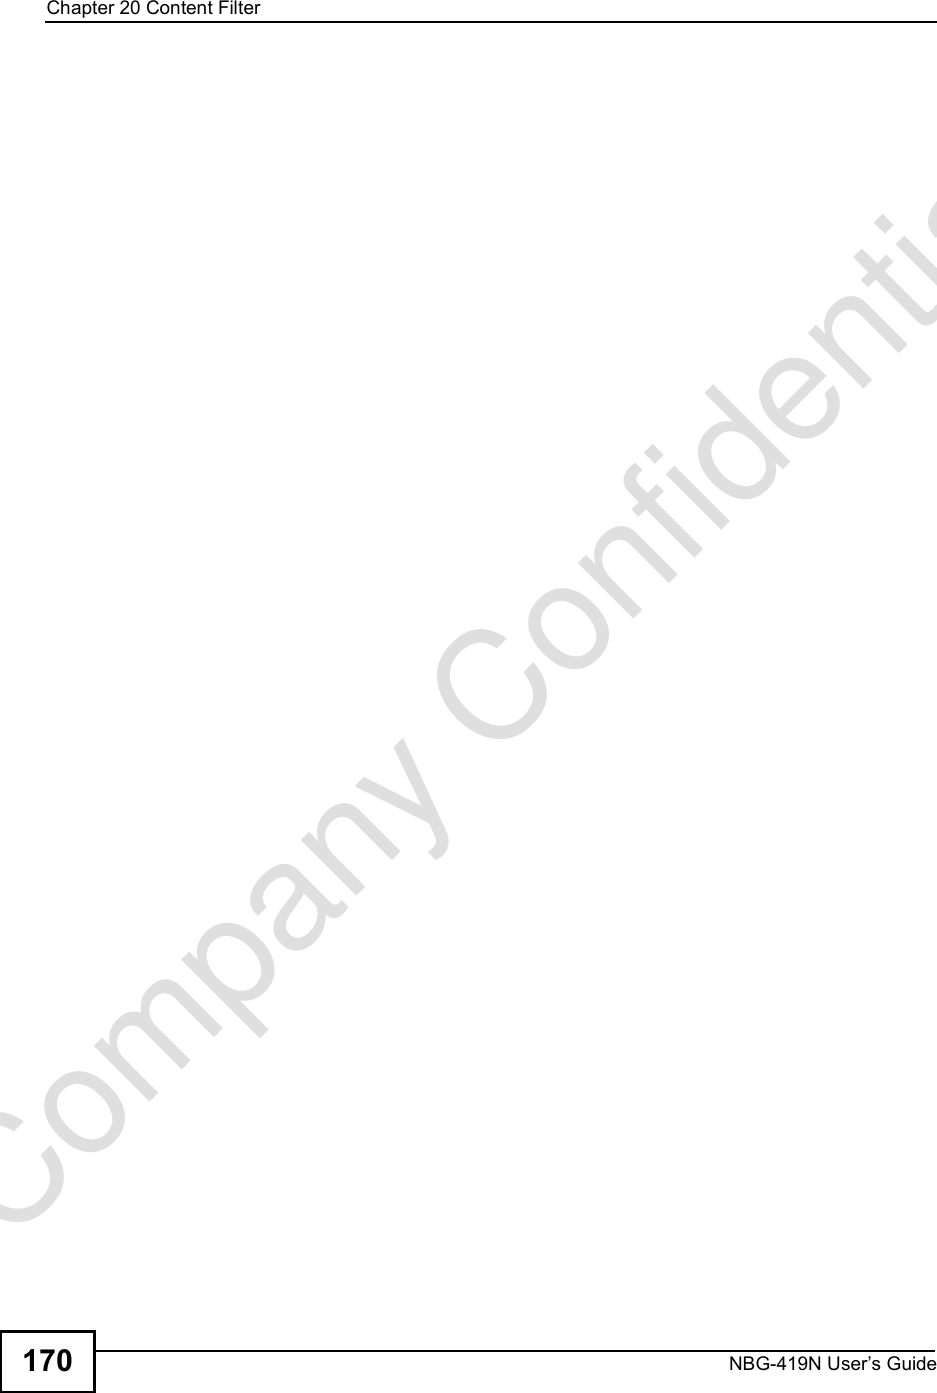 Chapter 20Content FilterNBG-419N User s Guide170Company Confidential